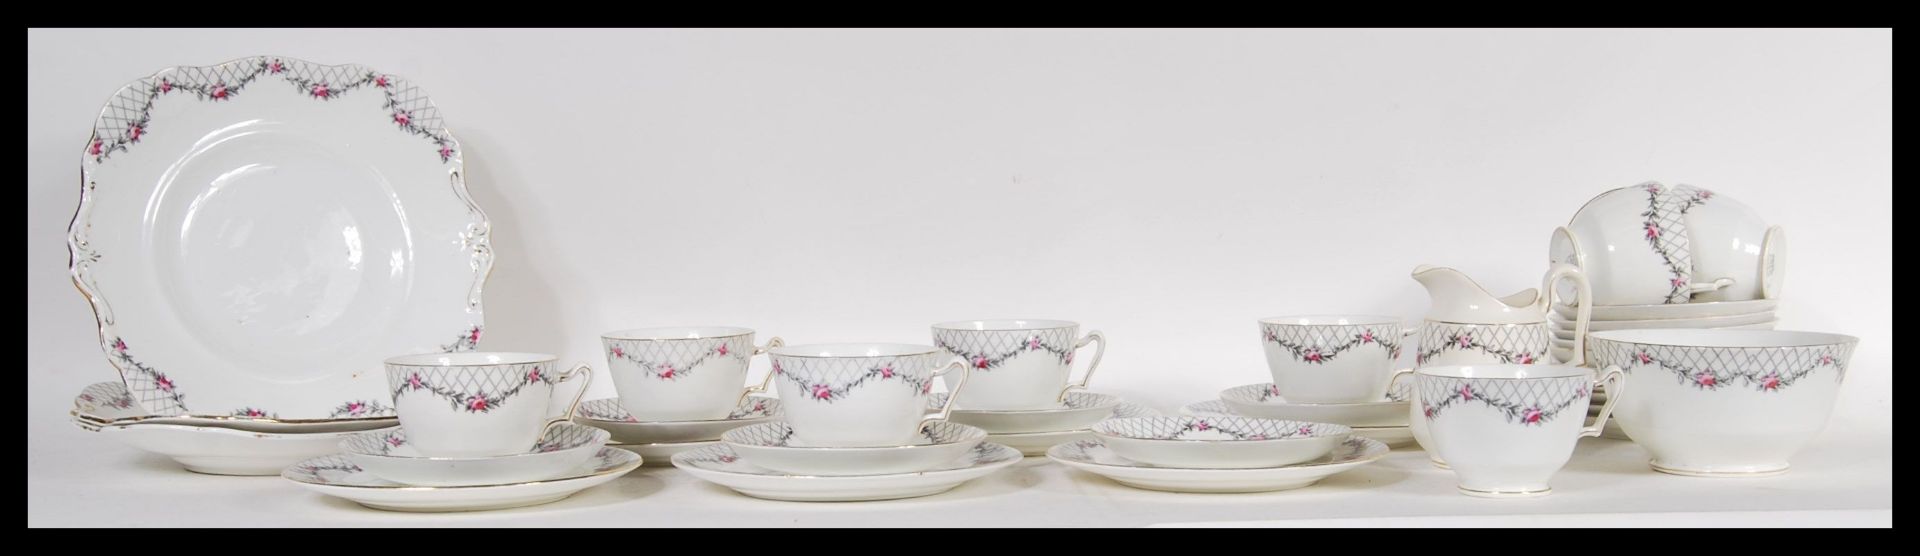 A 20th Century Paragon fine English bone china tea service in the Rose Garden pattern consisting